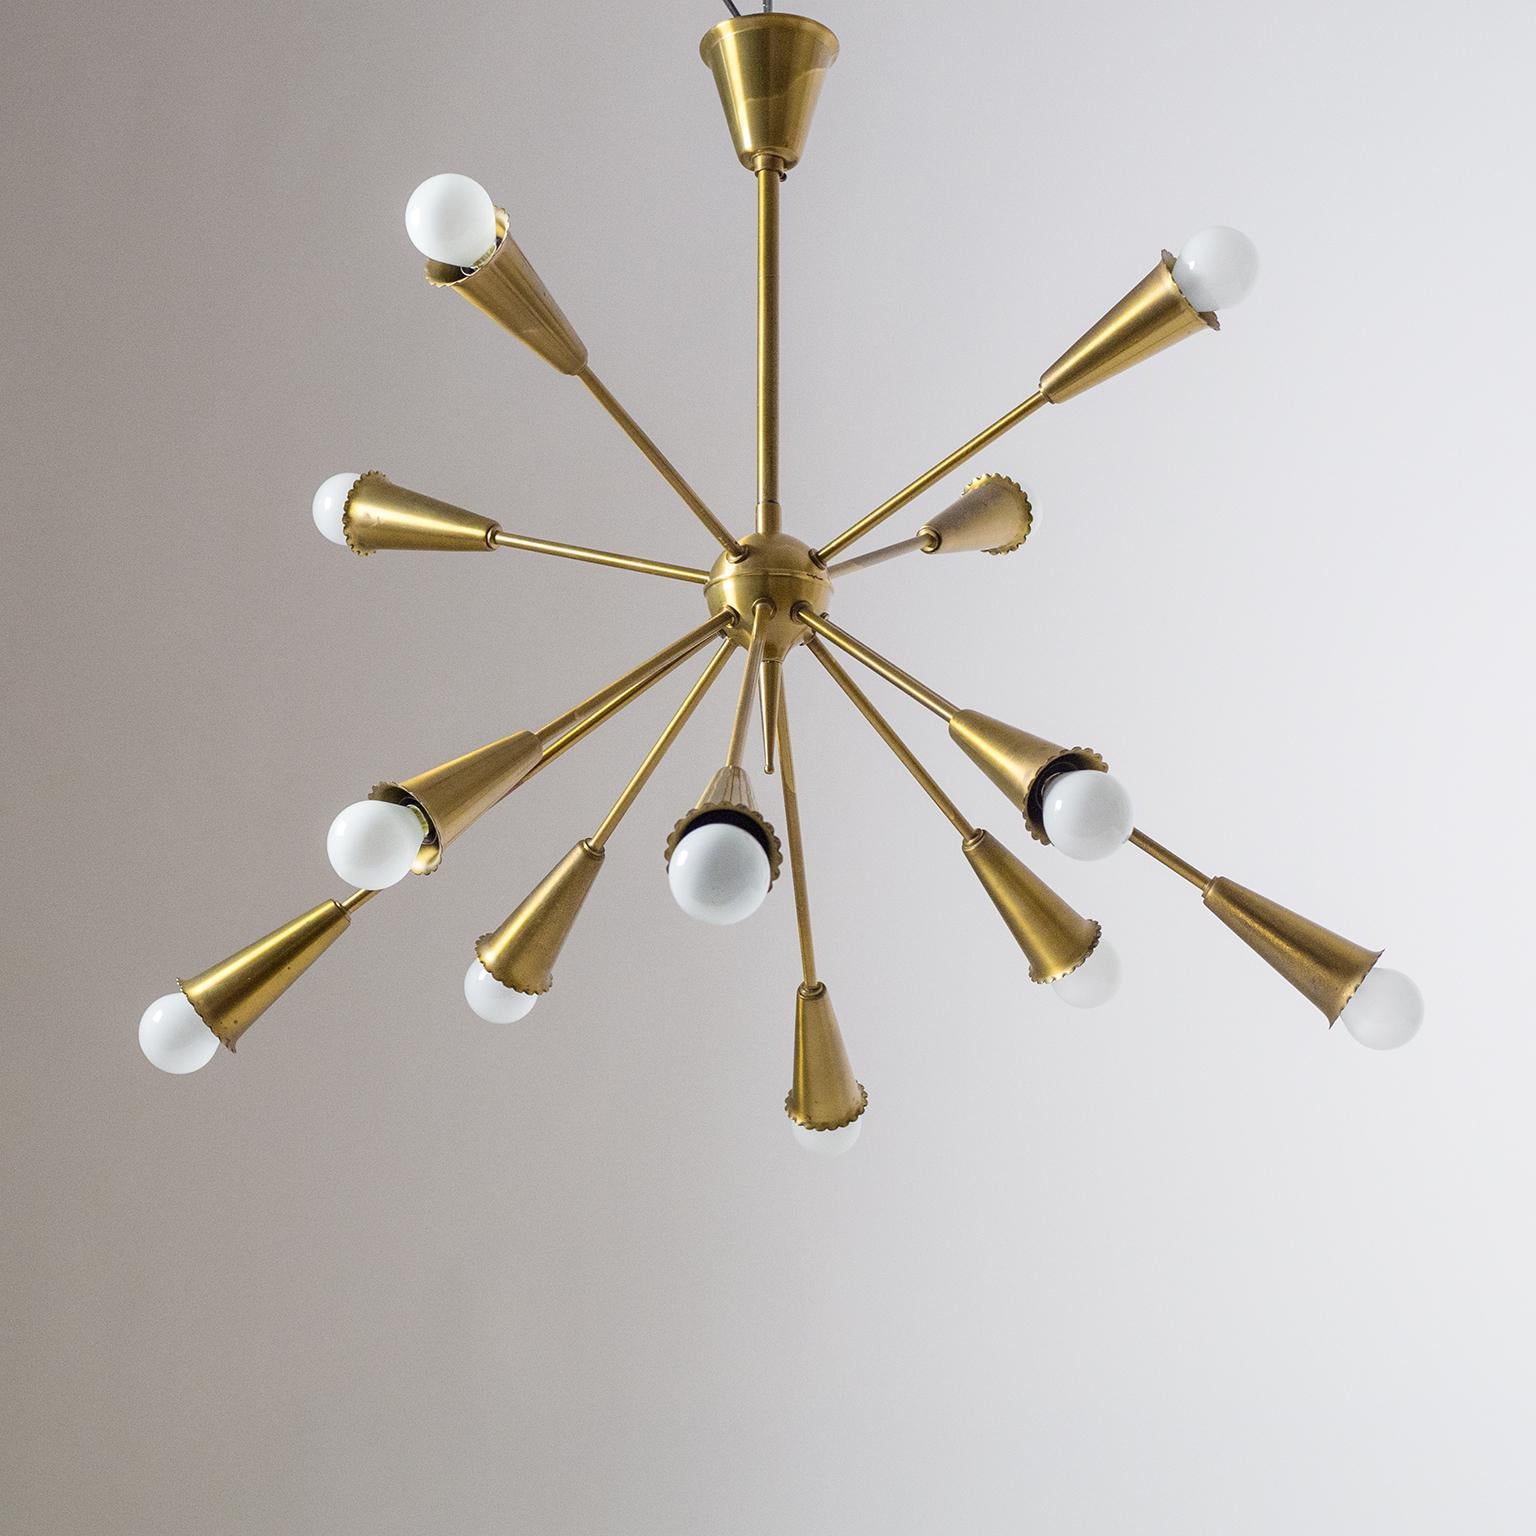 Beautiful all brass sputnik chandelier from the 1950s attributed to Hans Bergström. Twelve arms in two lengths emanate from a brass centerpiece in firework manner. Each arm ends in a brass socket cover with a rare 'frilled' rim. Very good original